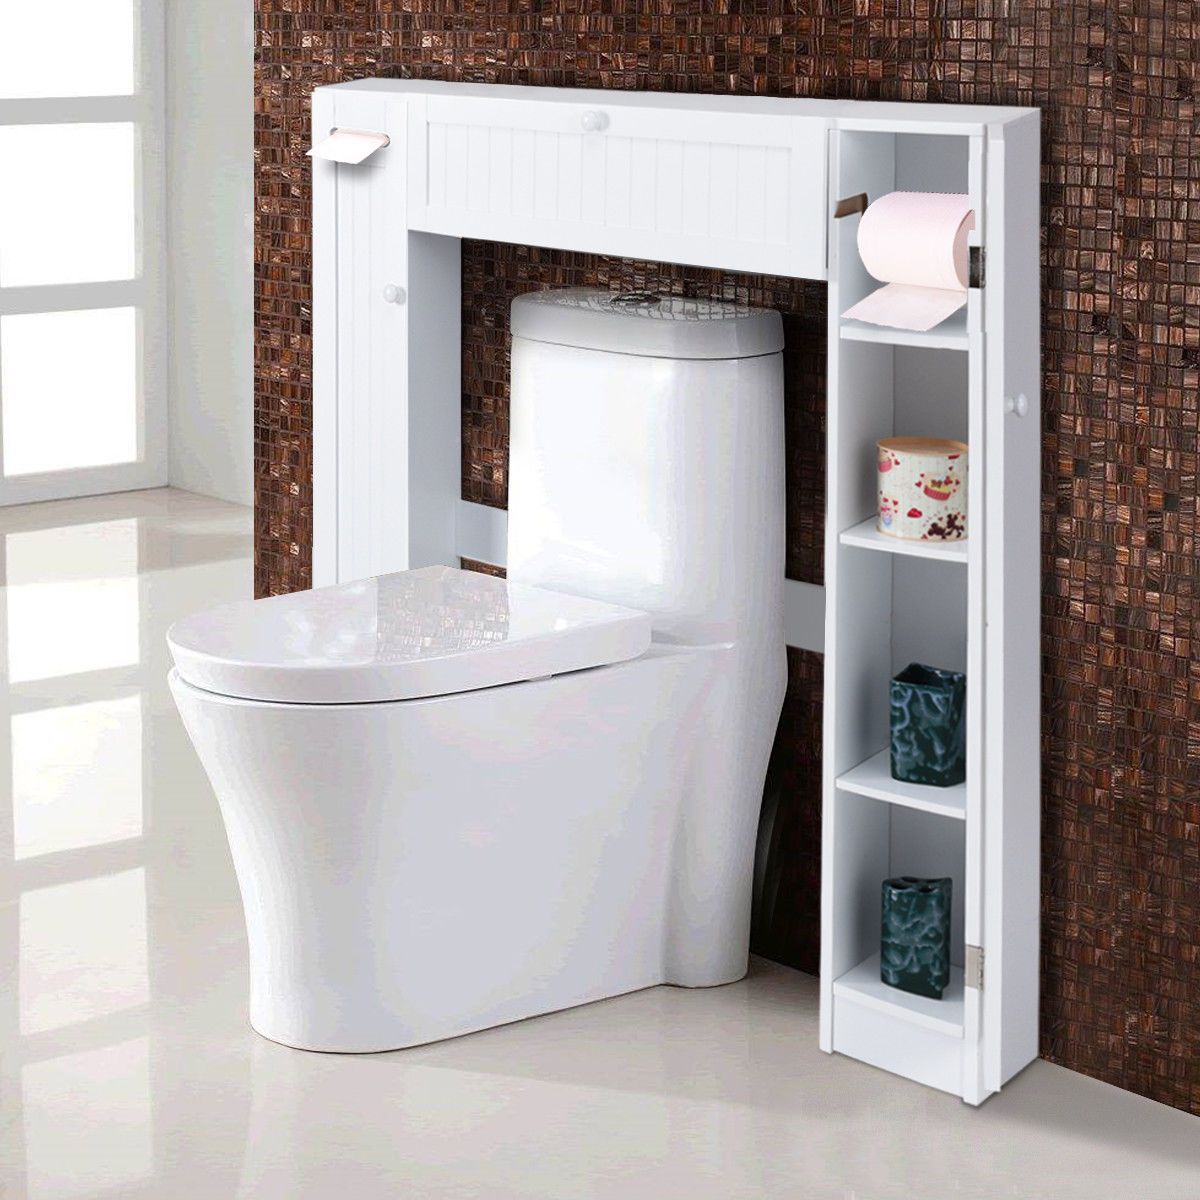 Bathroom Shelves Over Toilet Visualhunt, Solid Wood Free Standing Over The Toilet Storage Cabinet